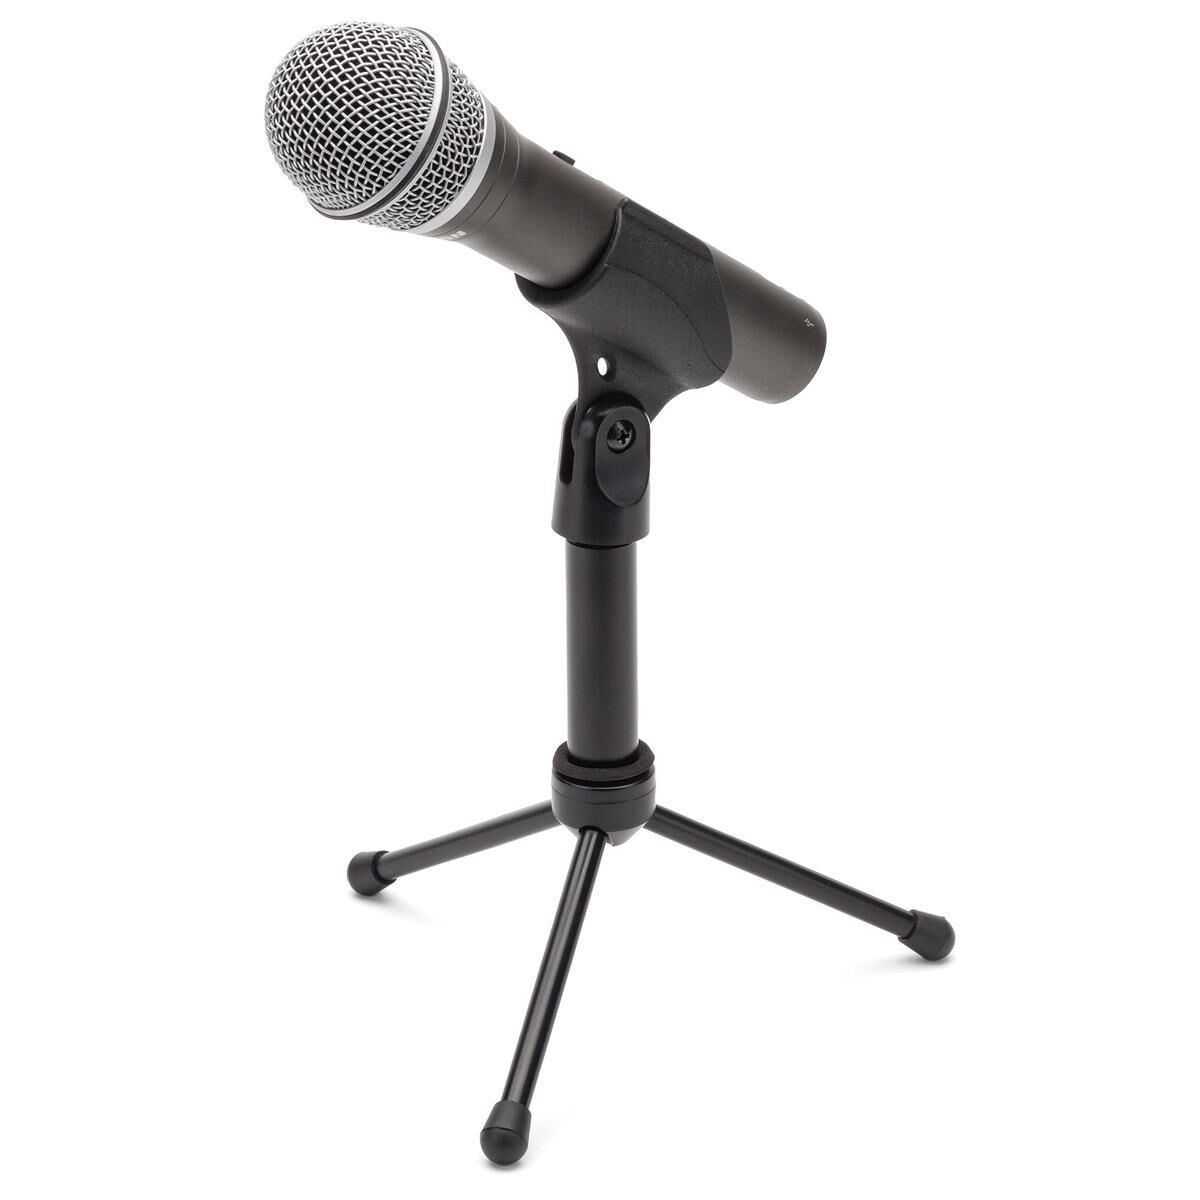 Samson Q2U Recording and Podcasting Pack with USB/XLR Dynamic Microphone